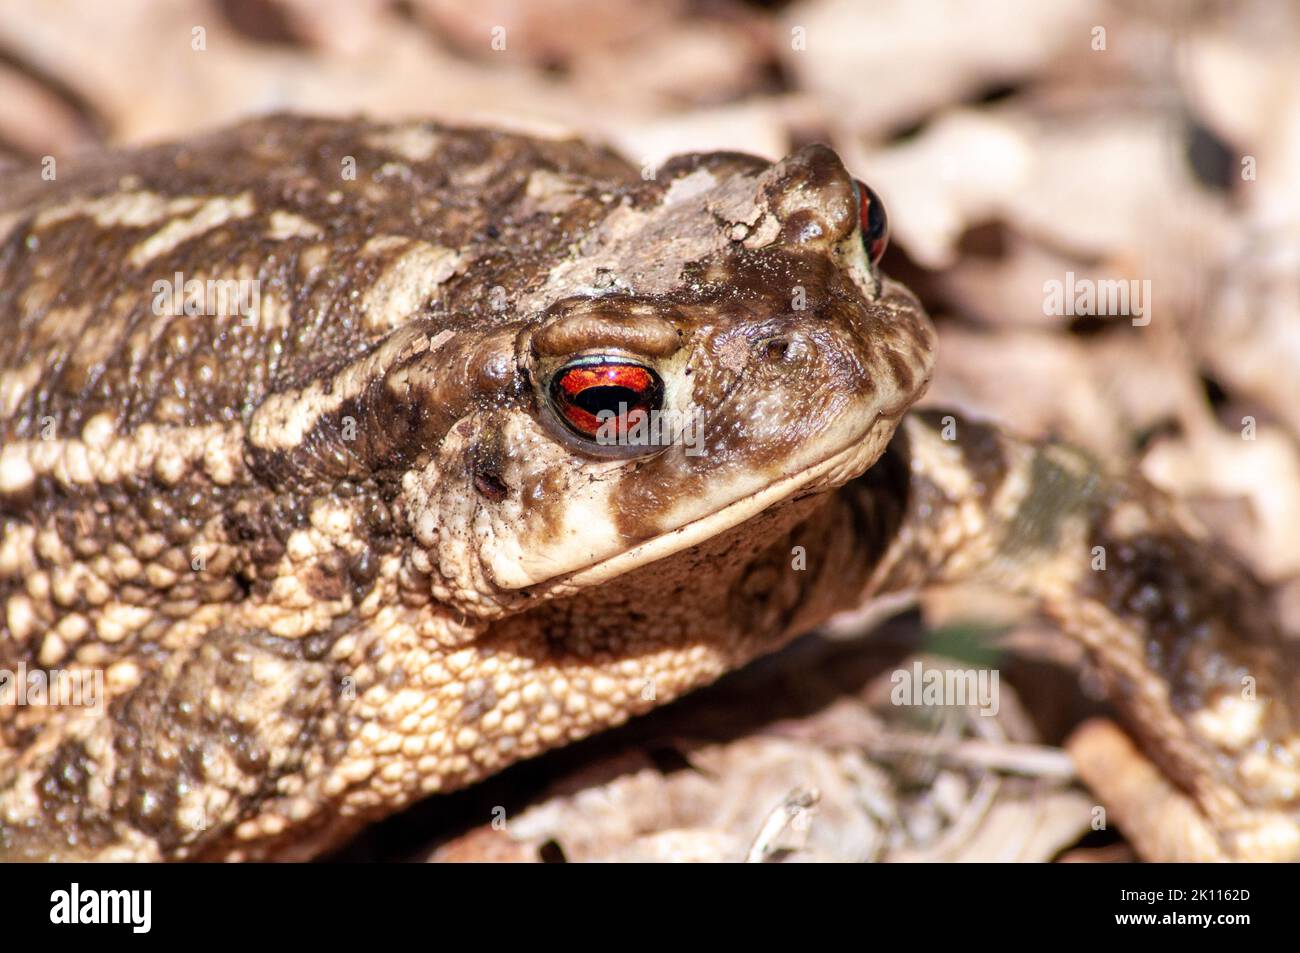 Close up photo of frog. Brown frog. Stock Photo